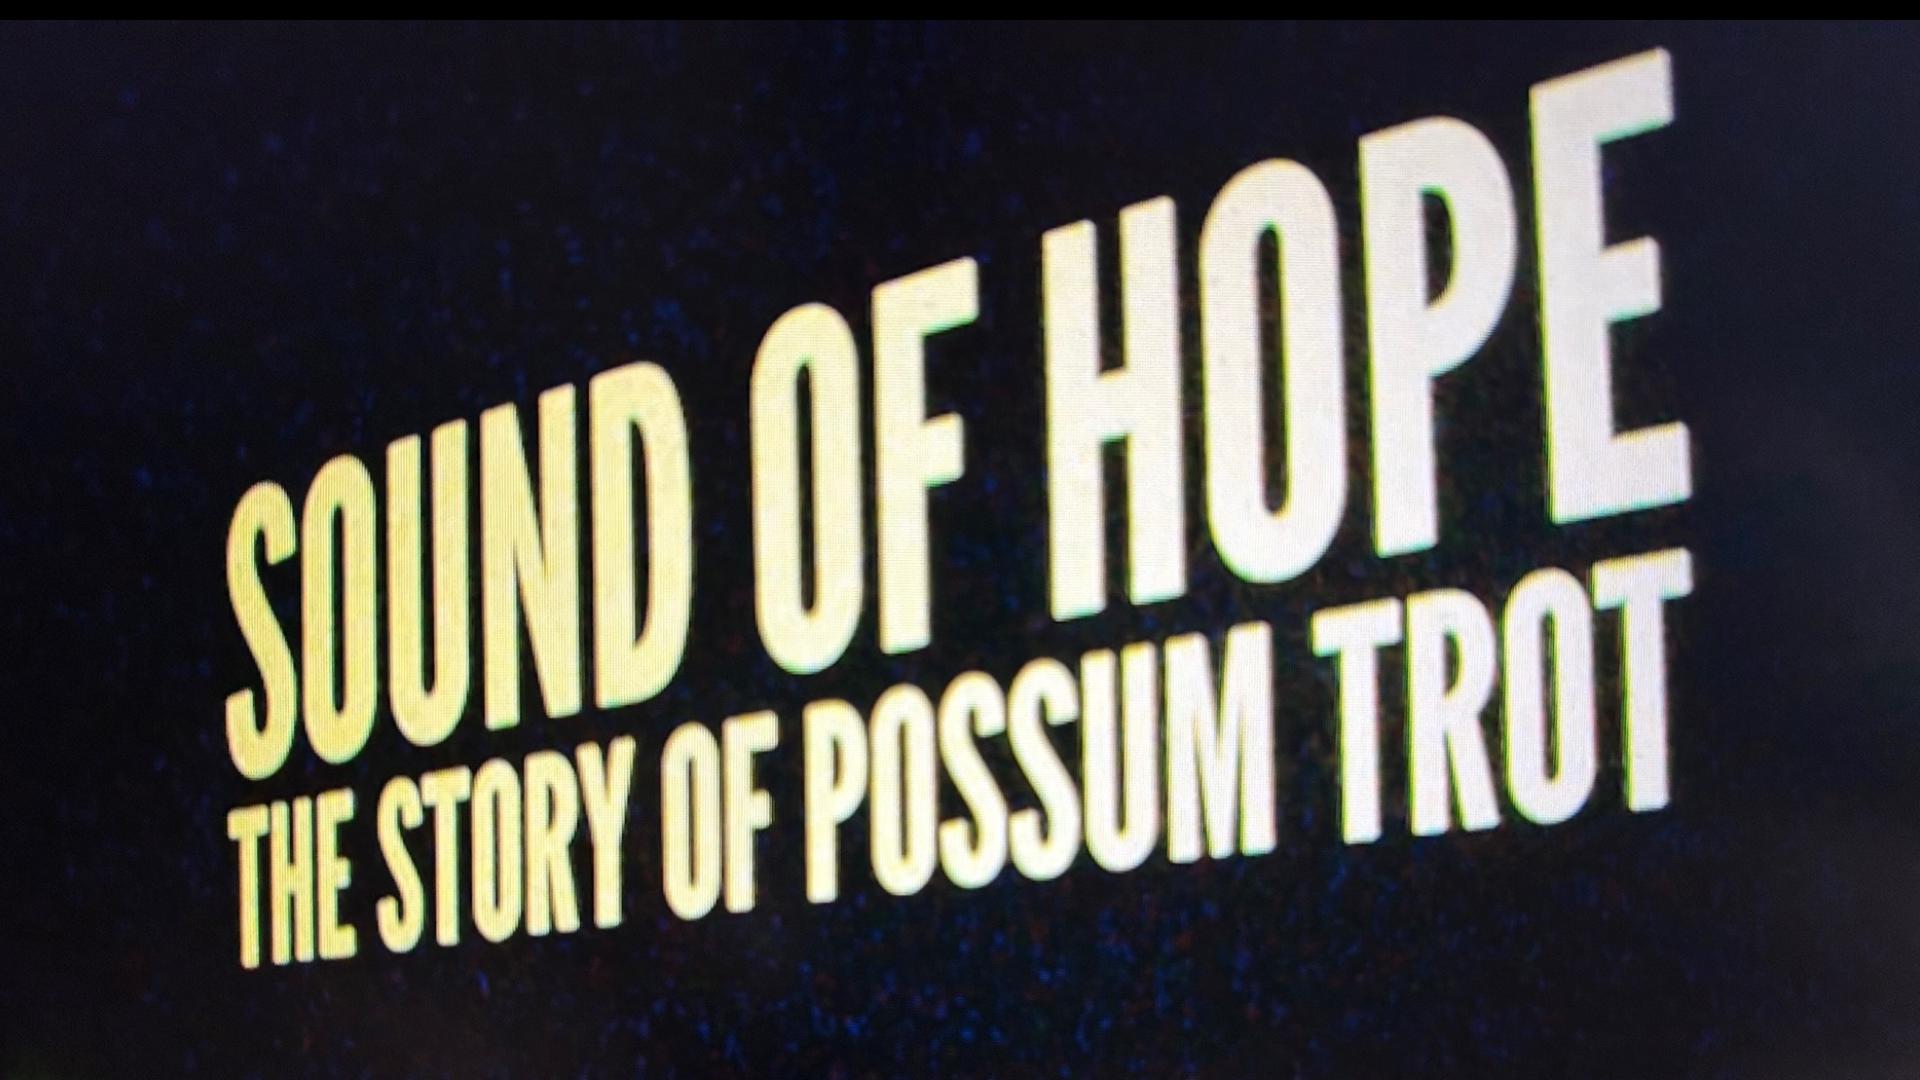 New movie Sound Of Hope: The Story Of Possum Trot set to released in theaters July 4th.